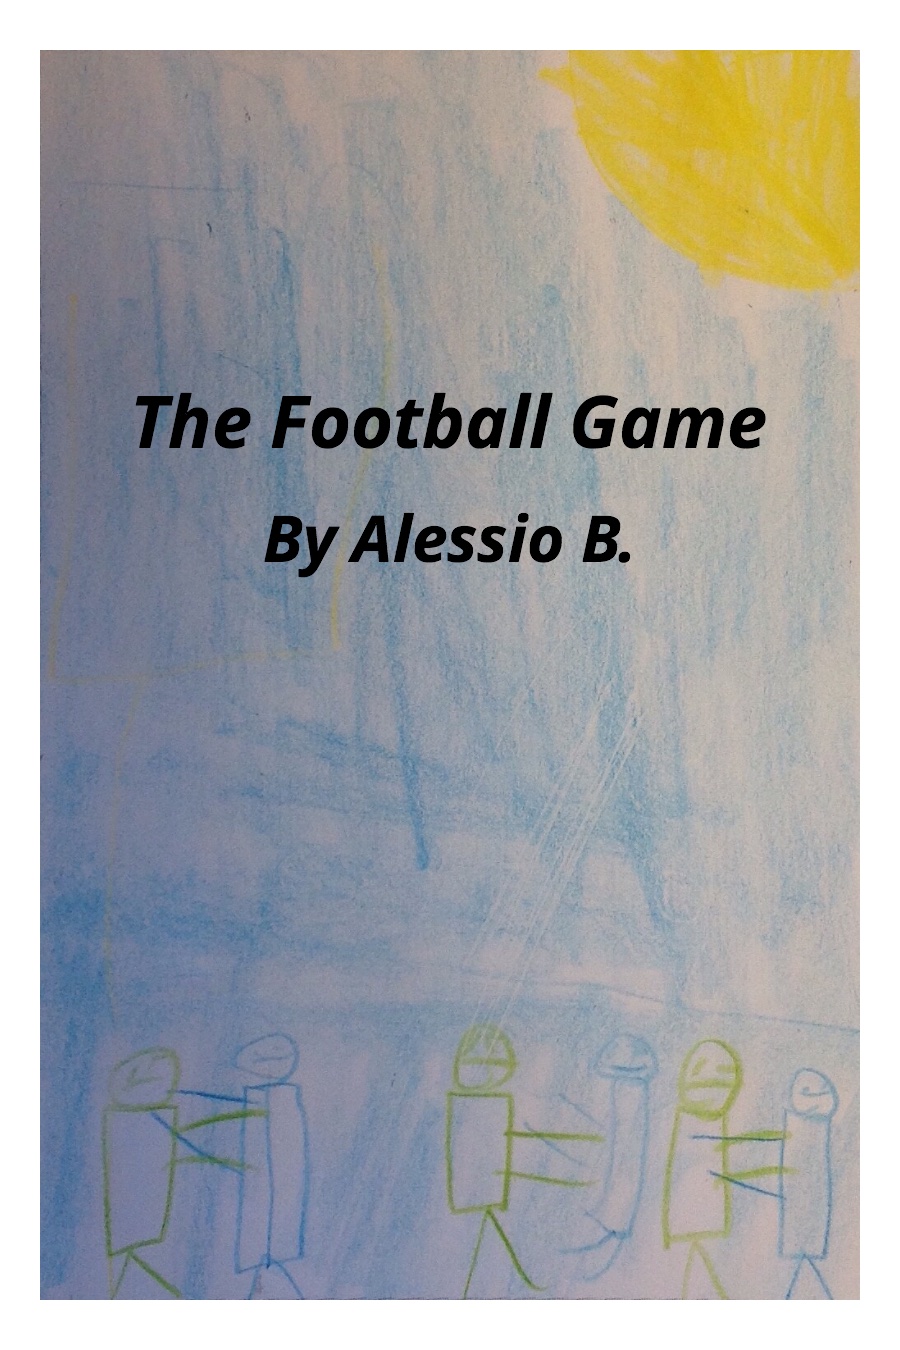 The Football Game by Alessio B